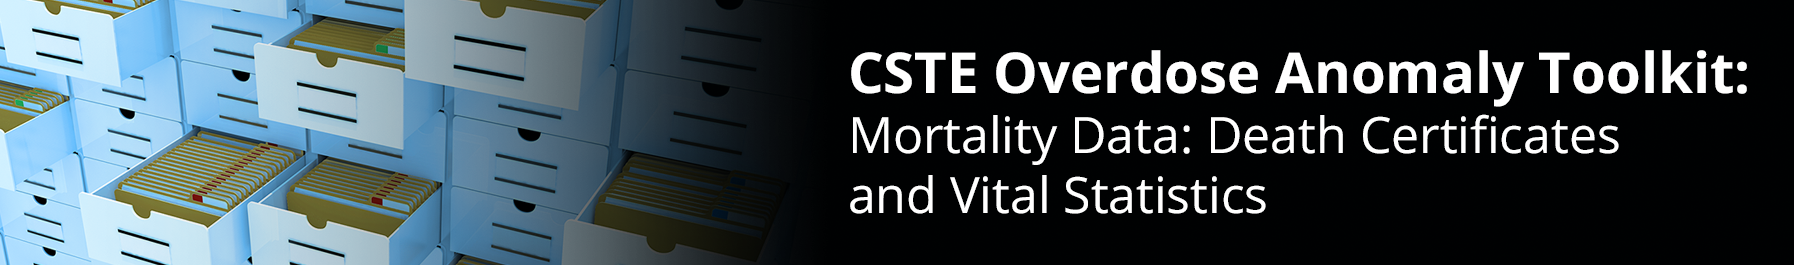 CSTE Overdose Anomaly Toolkit: Mortality Data: Death Certificates and Vital Statistics